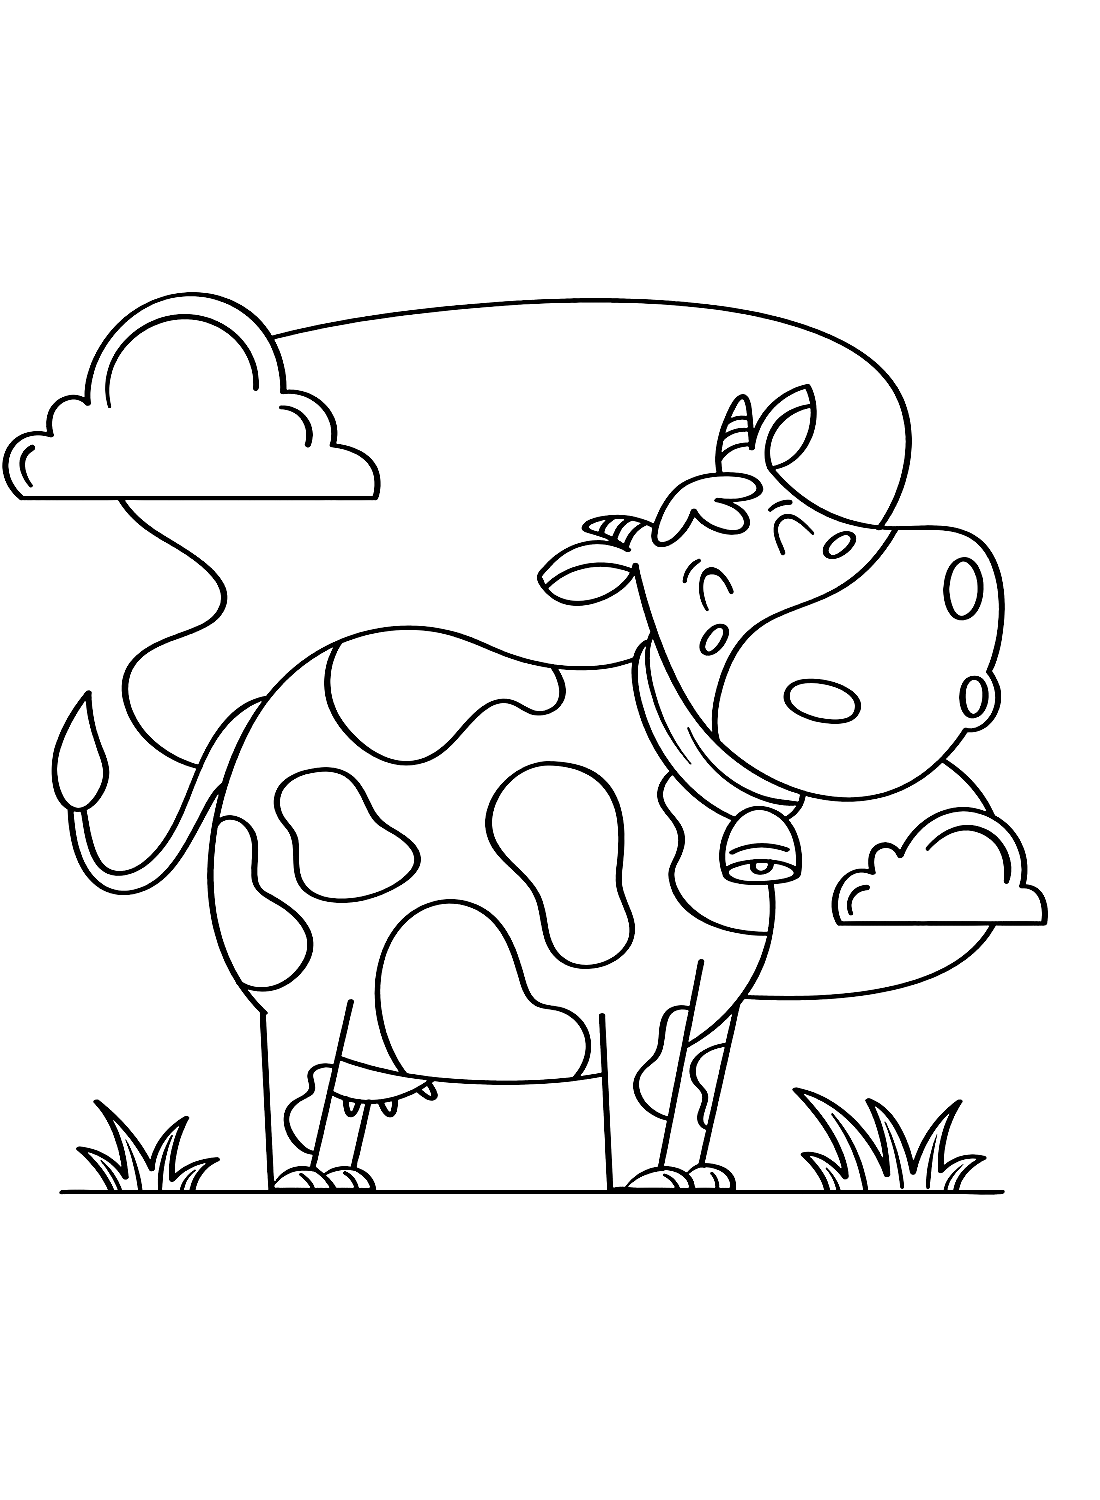 Happy Cow Coloring Sheet